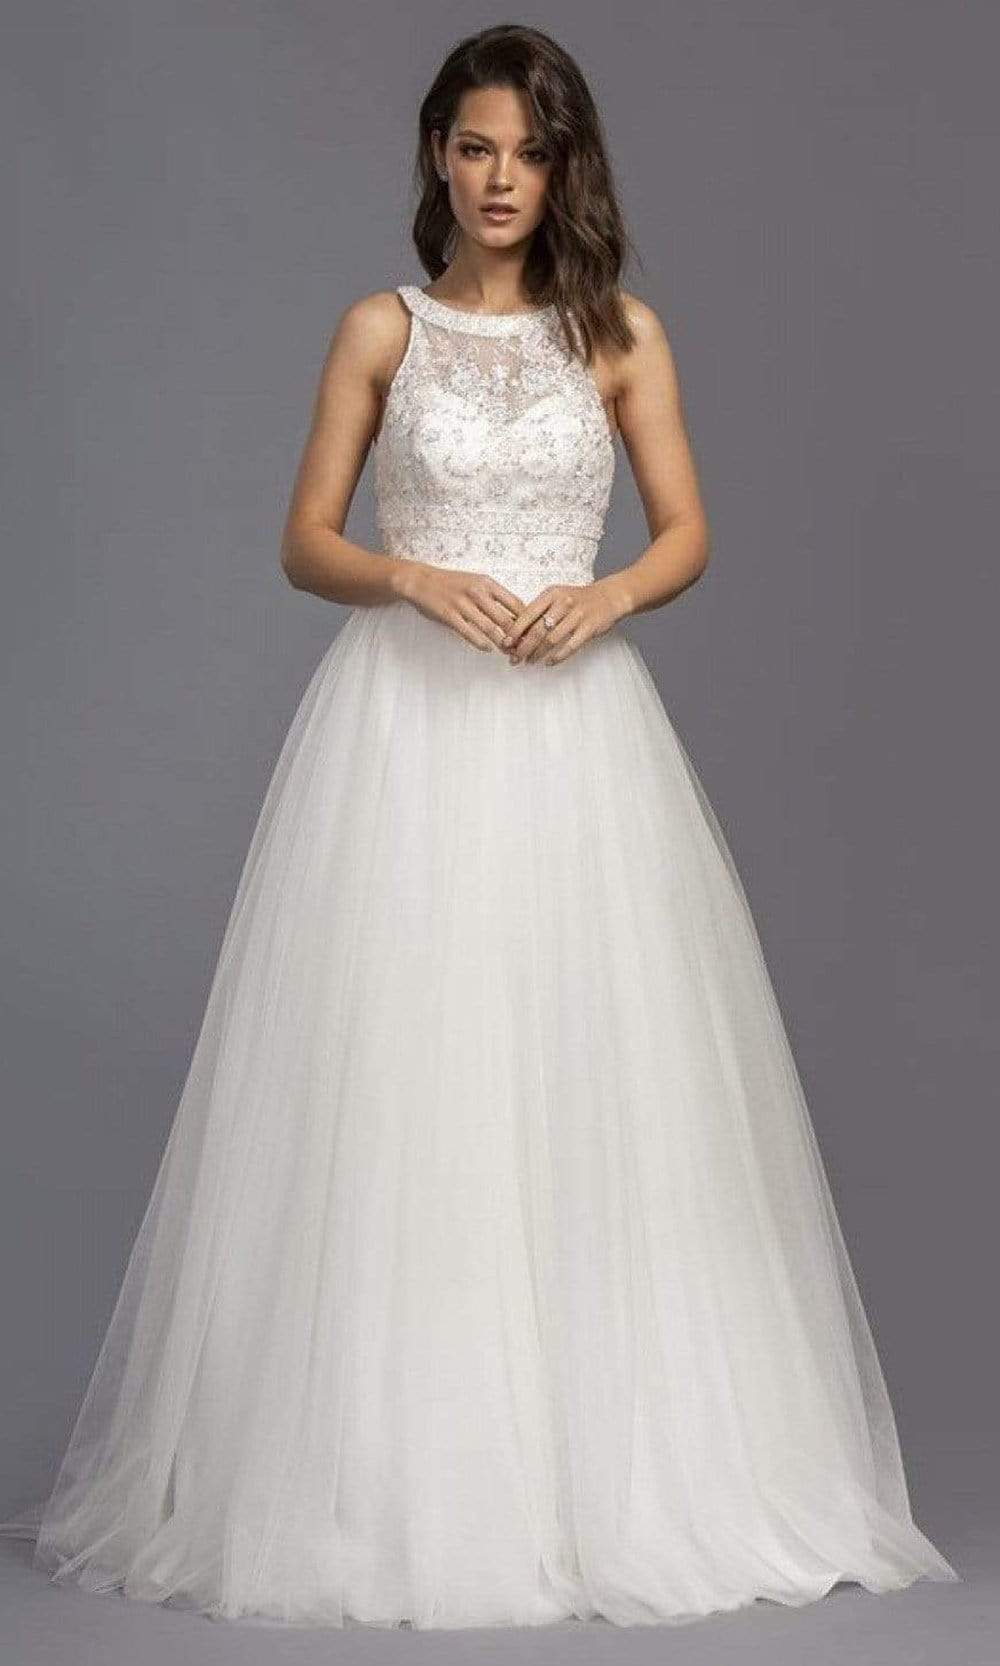 Aspeed Bridal - L2144 Halter Beaded Tulle A-Line Gown
